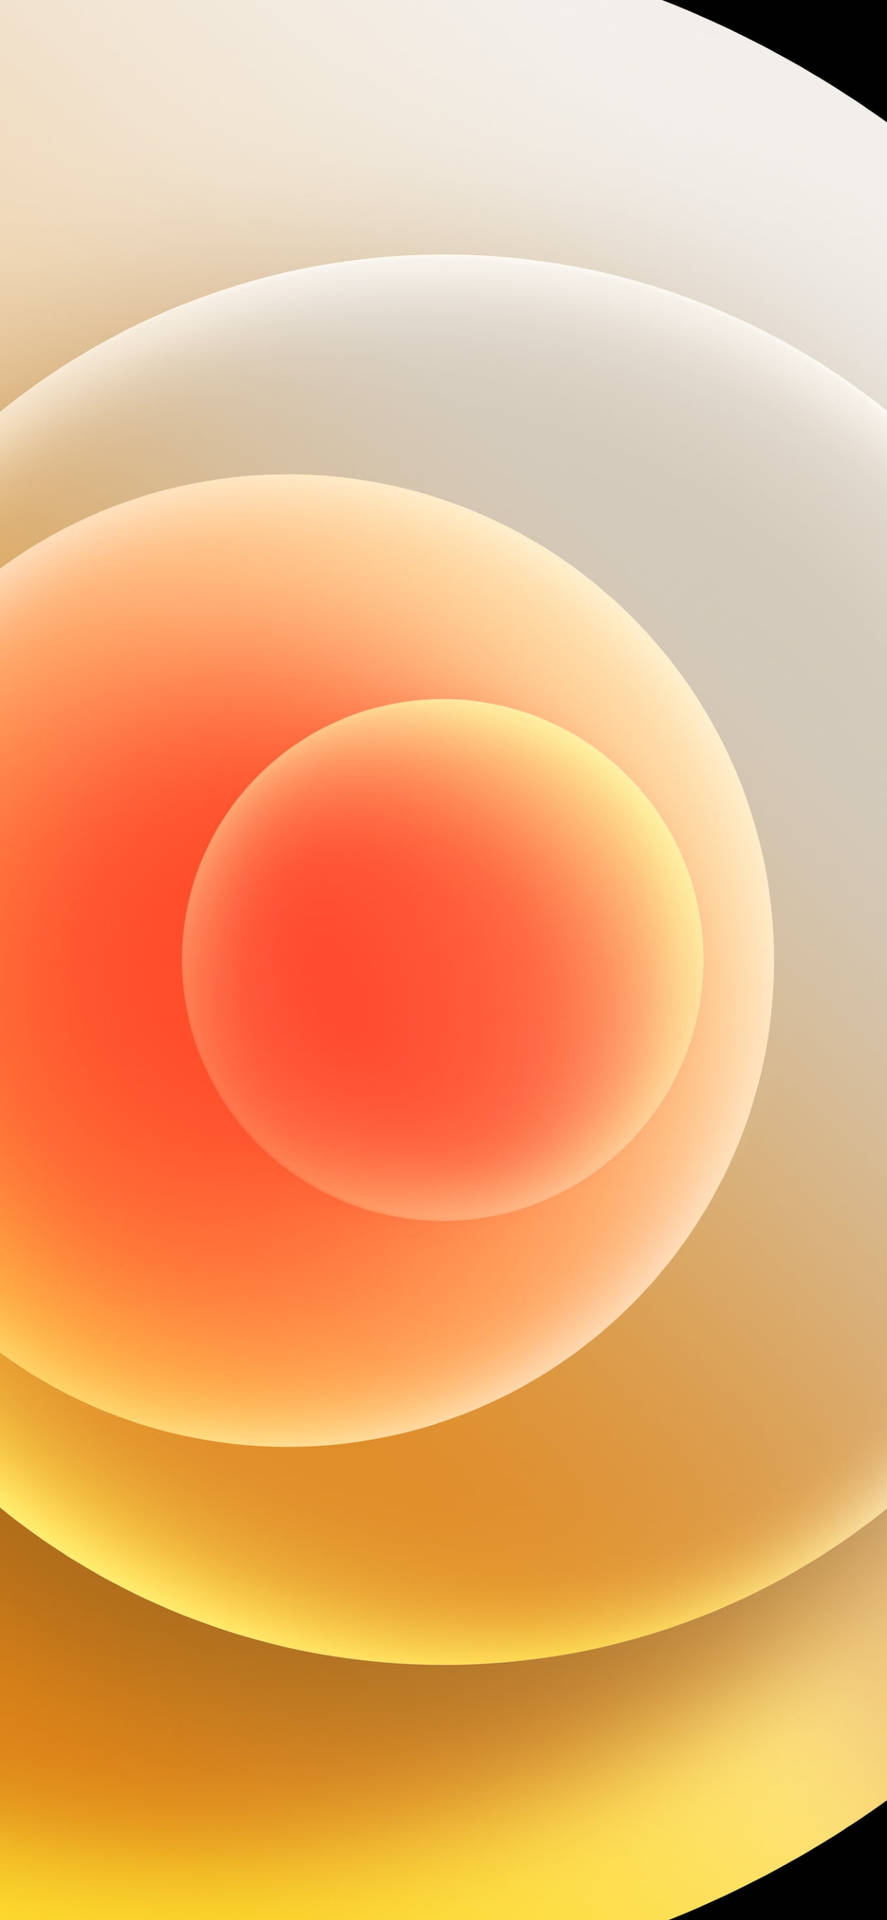 Iphone Xr Red Yellow Duplicate Circles Background